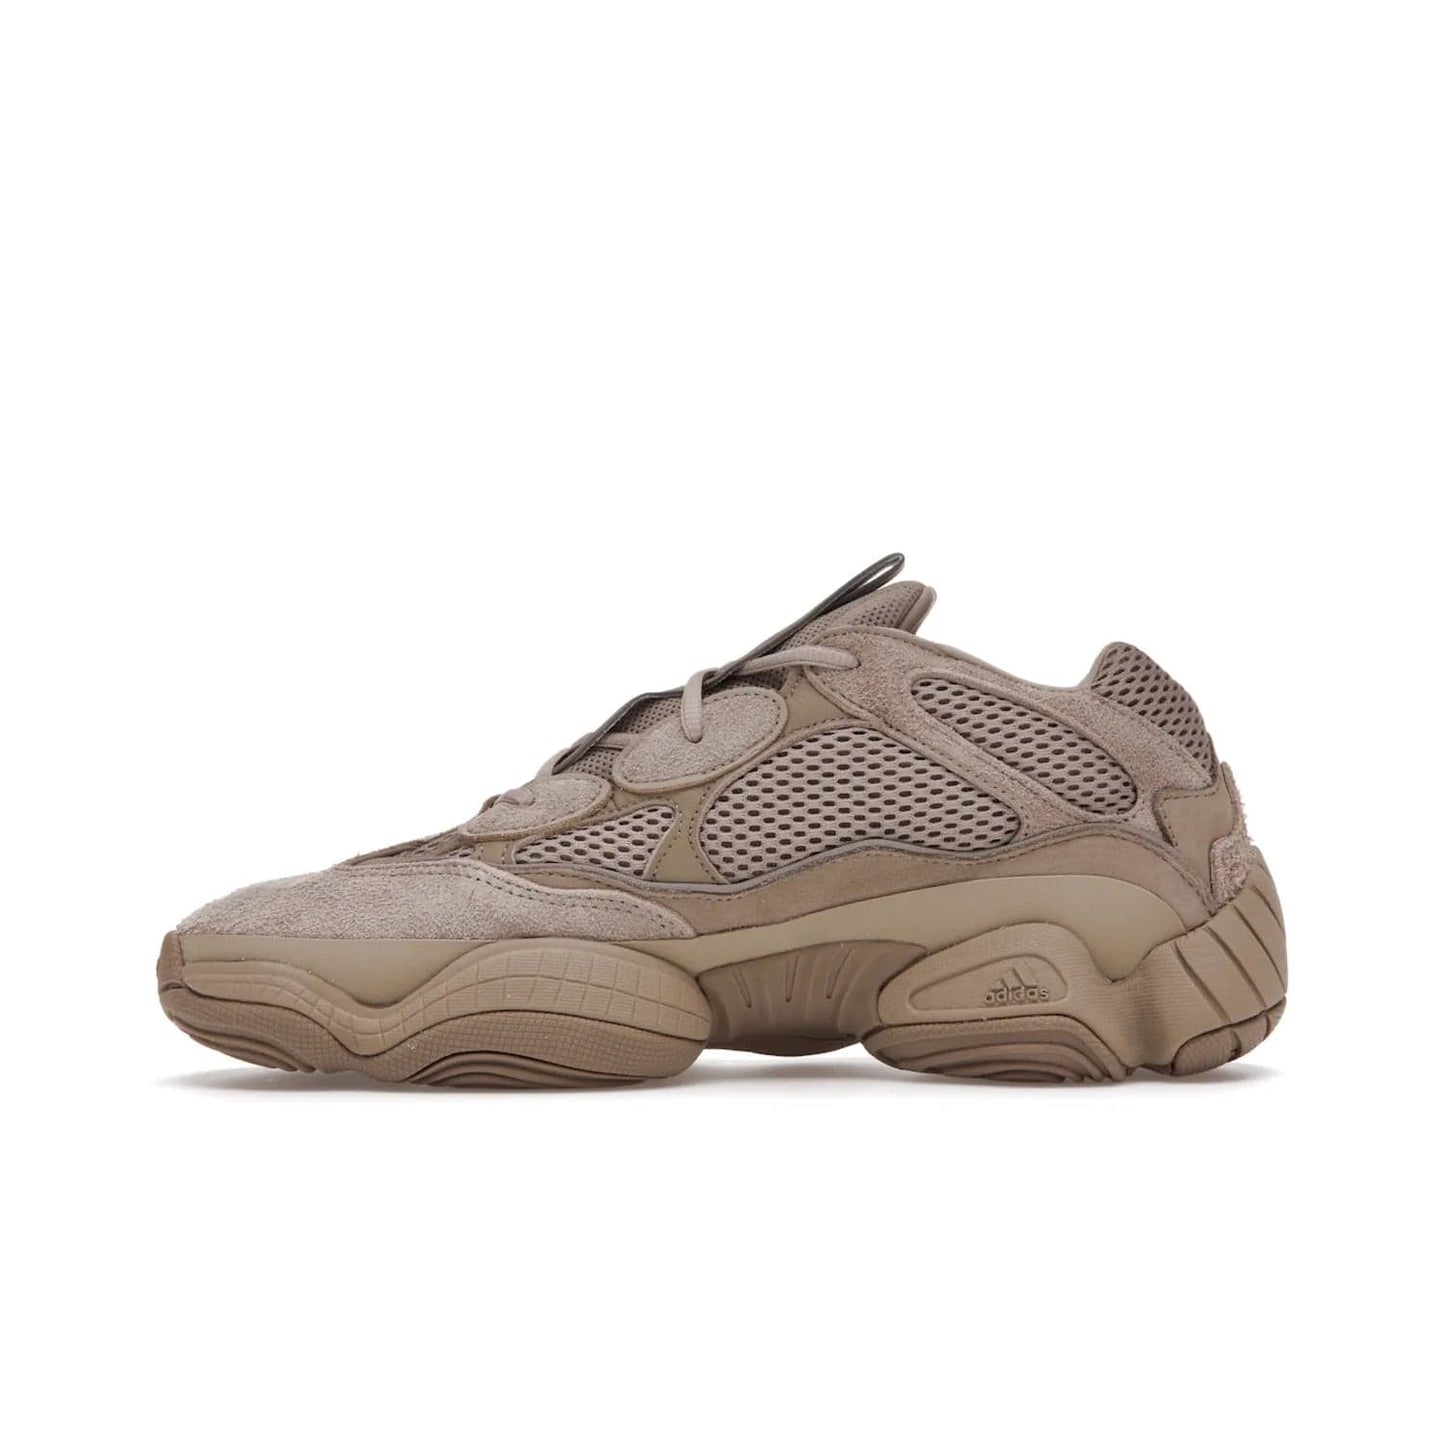 adidas Yeezy 500 Taupe Light - Image 19 - Only at www.BallersClubKickz.com - The adidas Yeezy 500 Taupe Light combines mesh, leather, and suede, with a durable adiPRENE sole for an eye-catching accessory. Reflective piping adds the perfect finishing touches to this unique silhouette. Ideal for any wardrobe, releasing in June 2021.